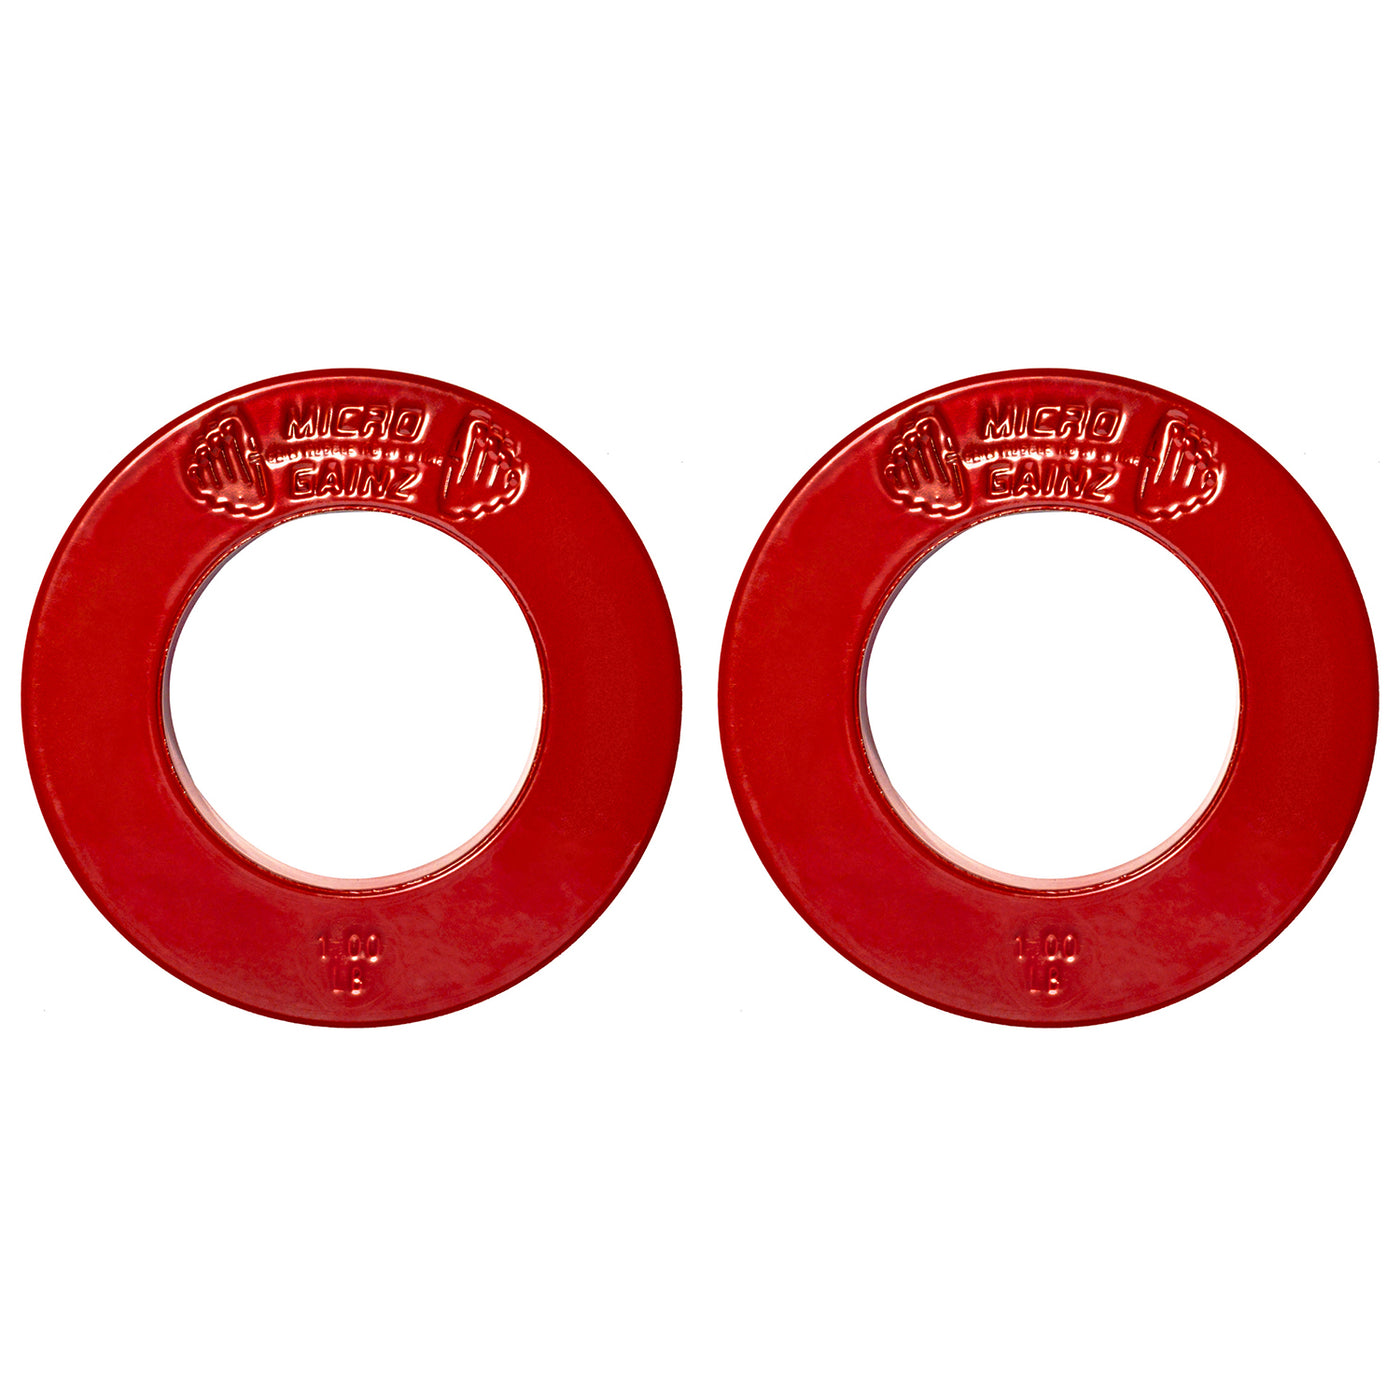 Micro Gainz Olympic Size Fractional Weight Plates Pair of 1LB Plates